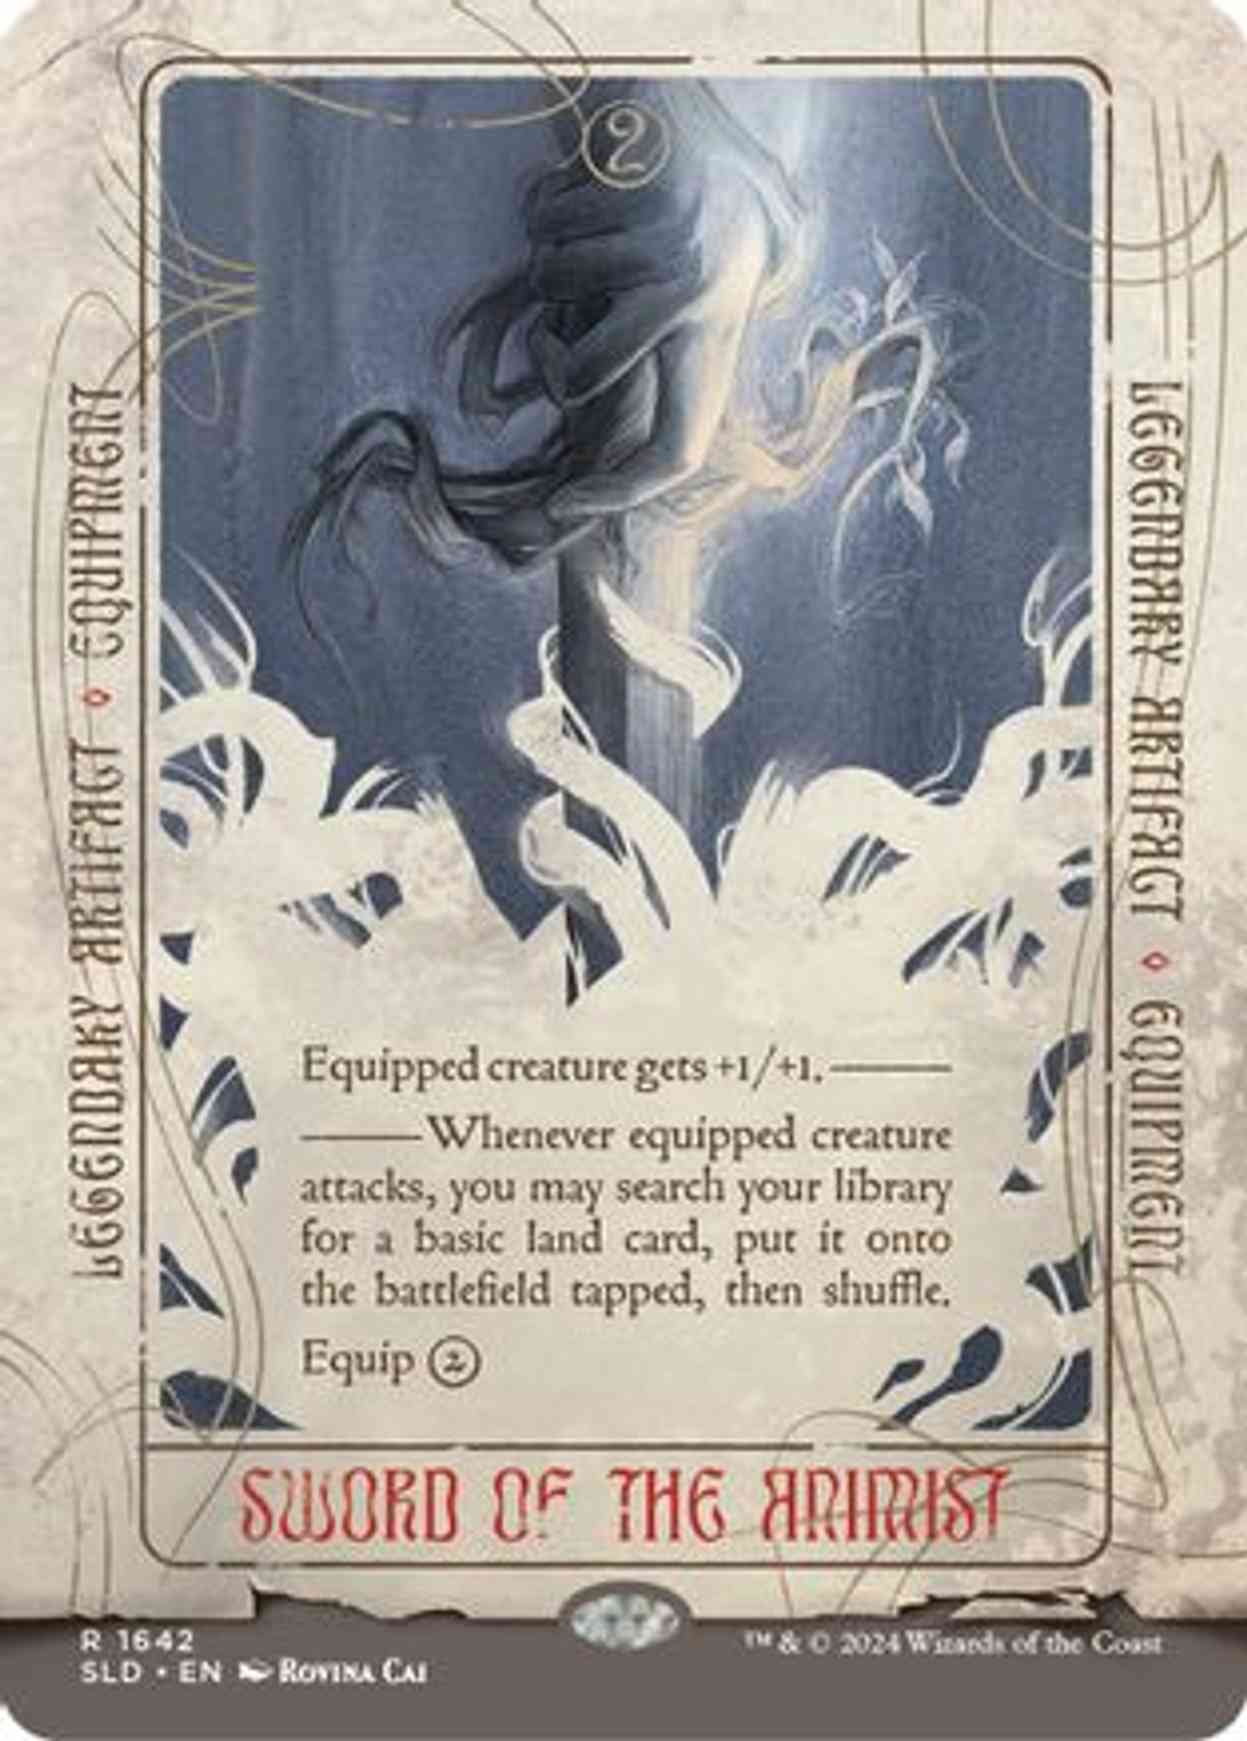 Sword of the Animist magic card front